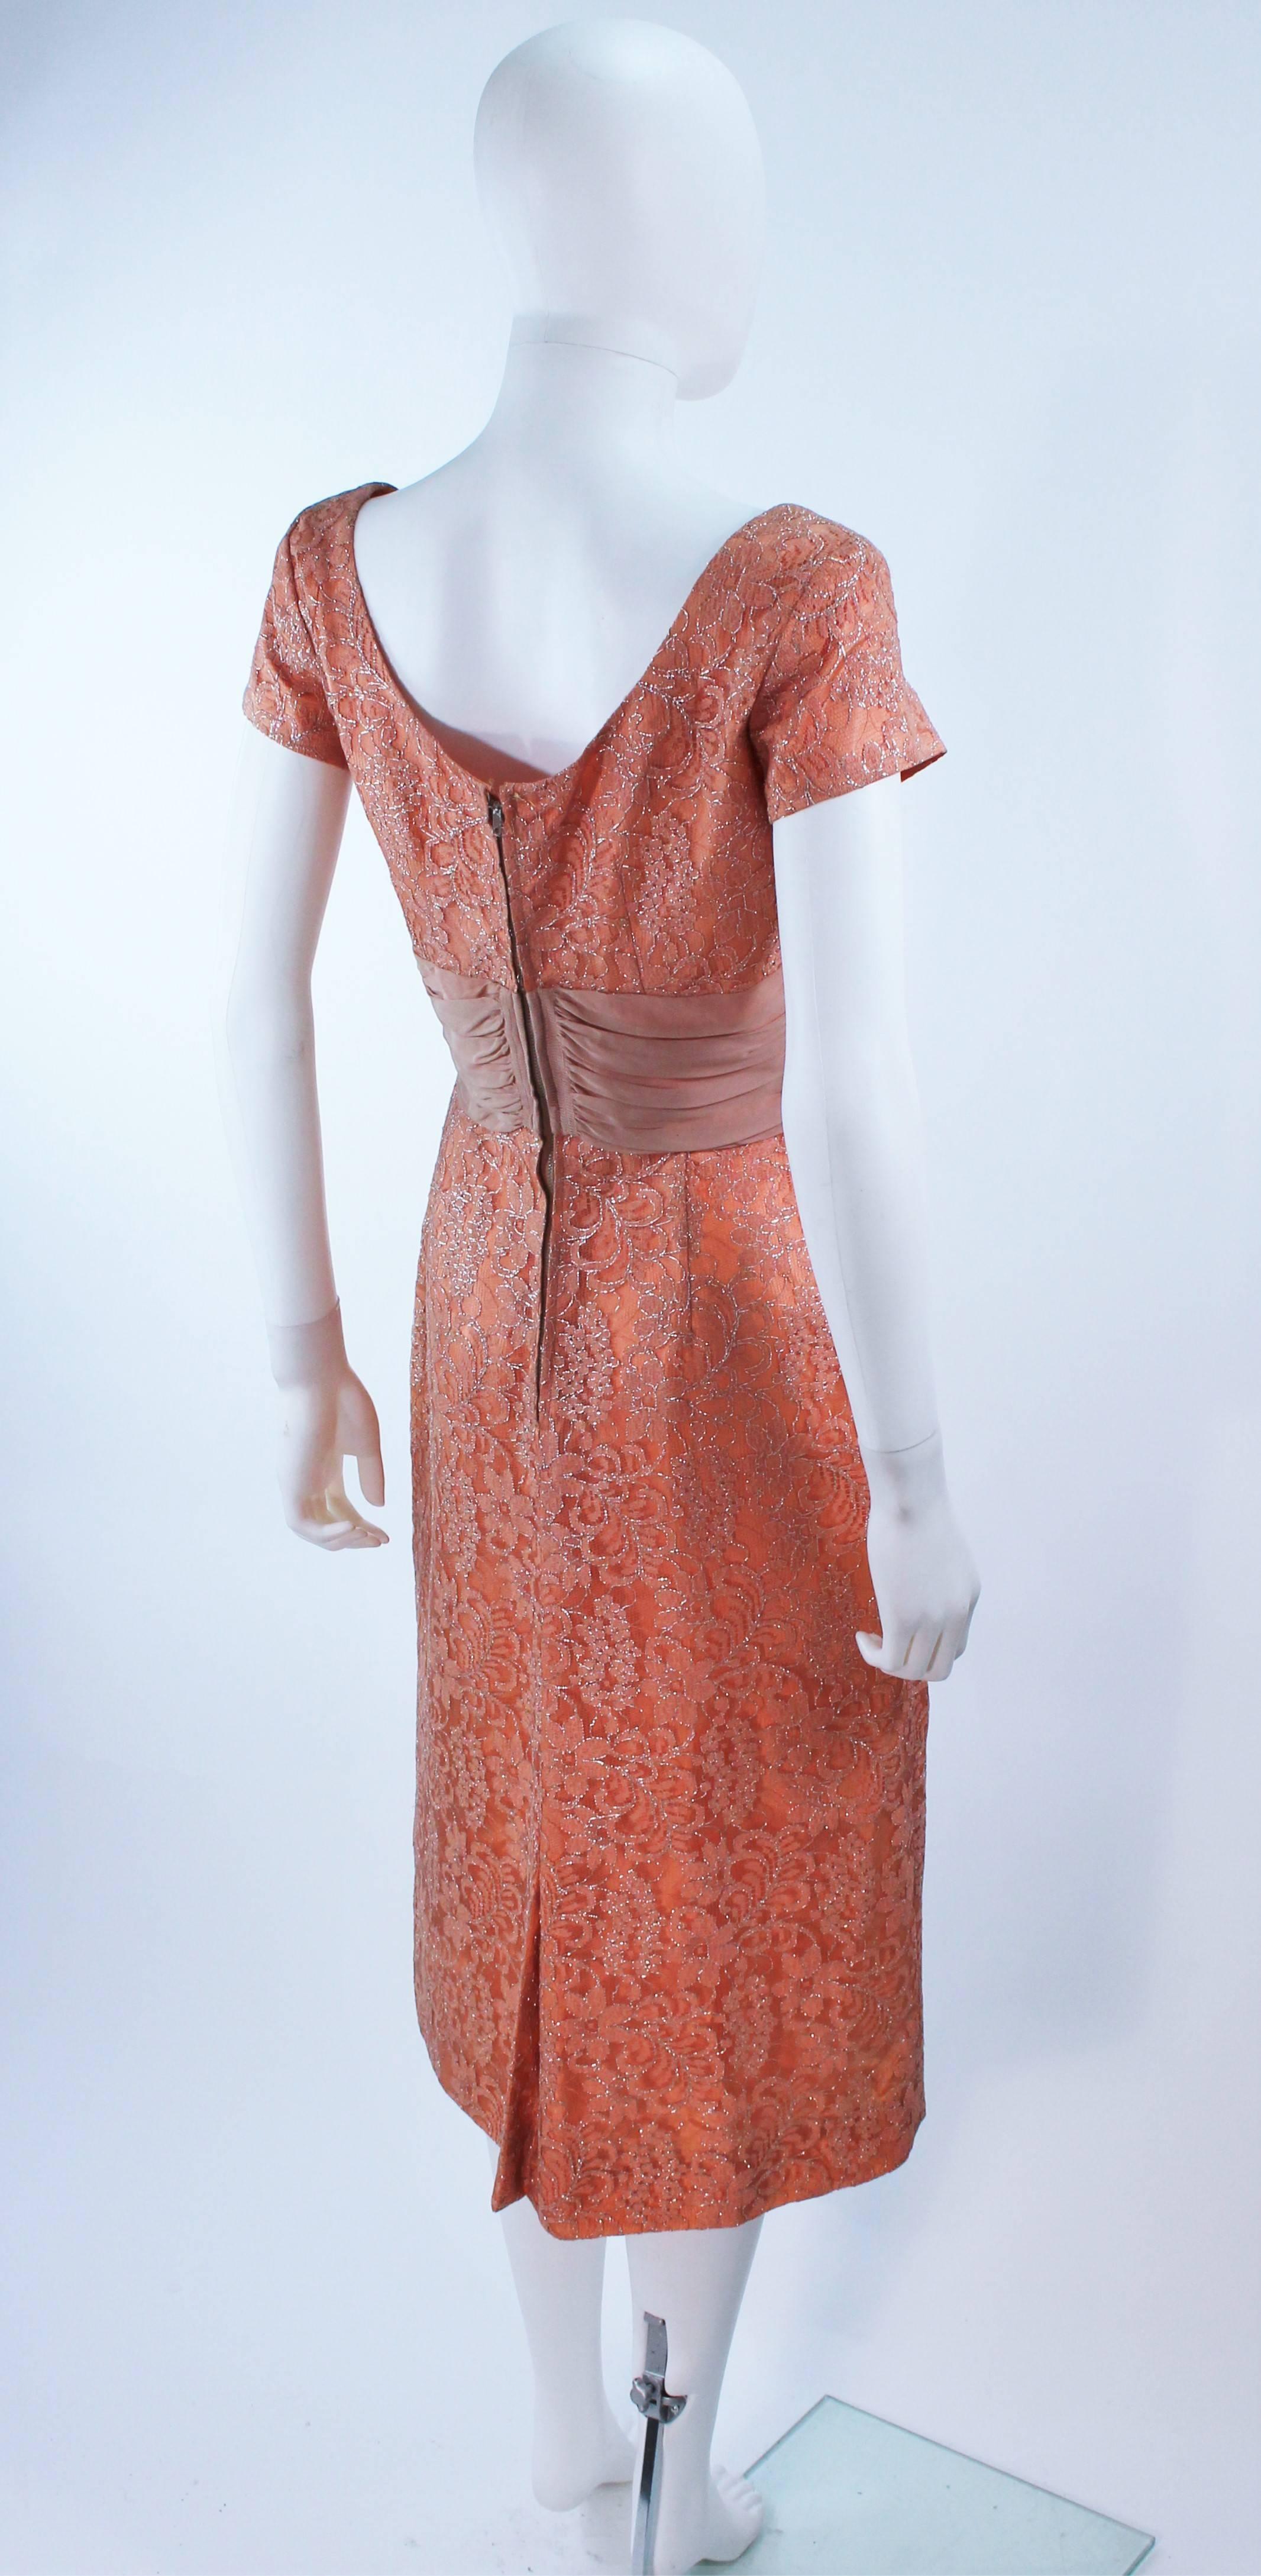 Women's 1950's Peach Metallic Lace Short Sleeve Cocktail Dress Size 6 For Sale